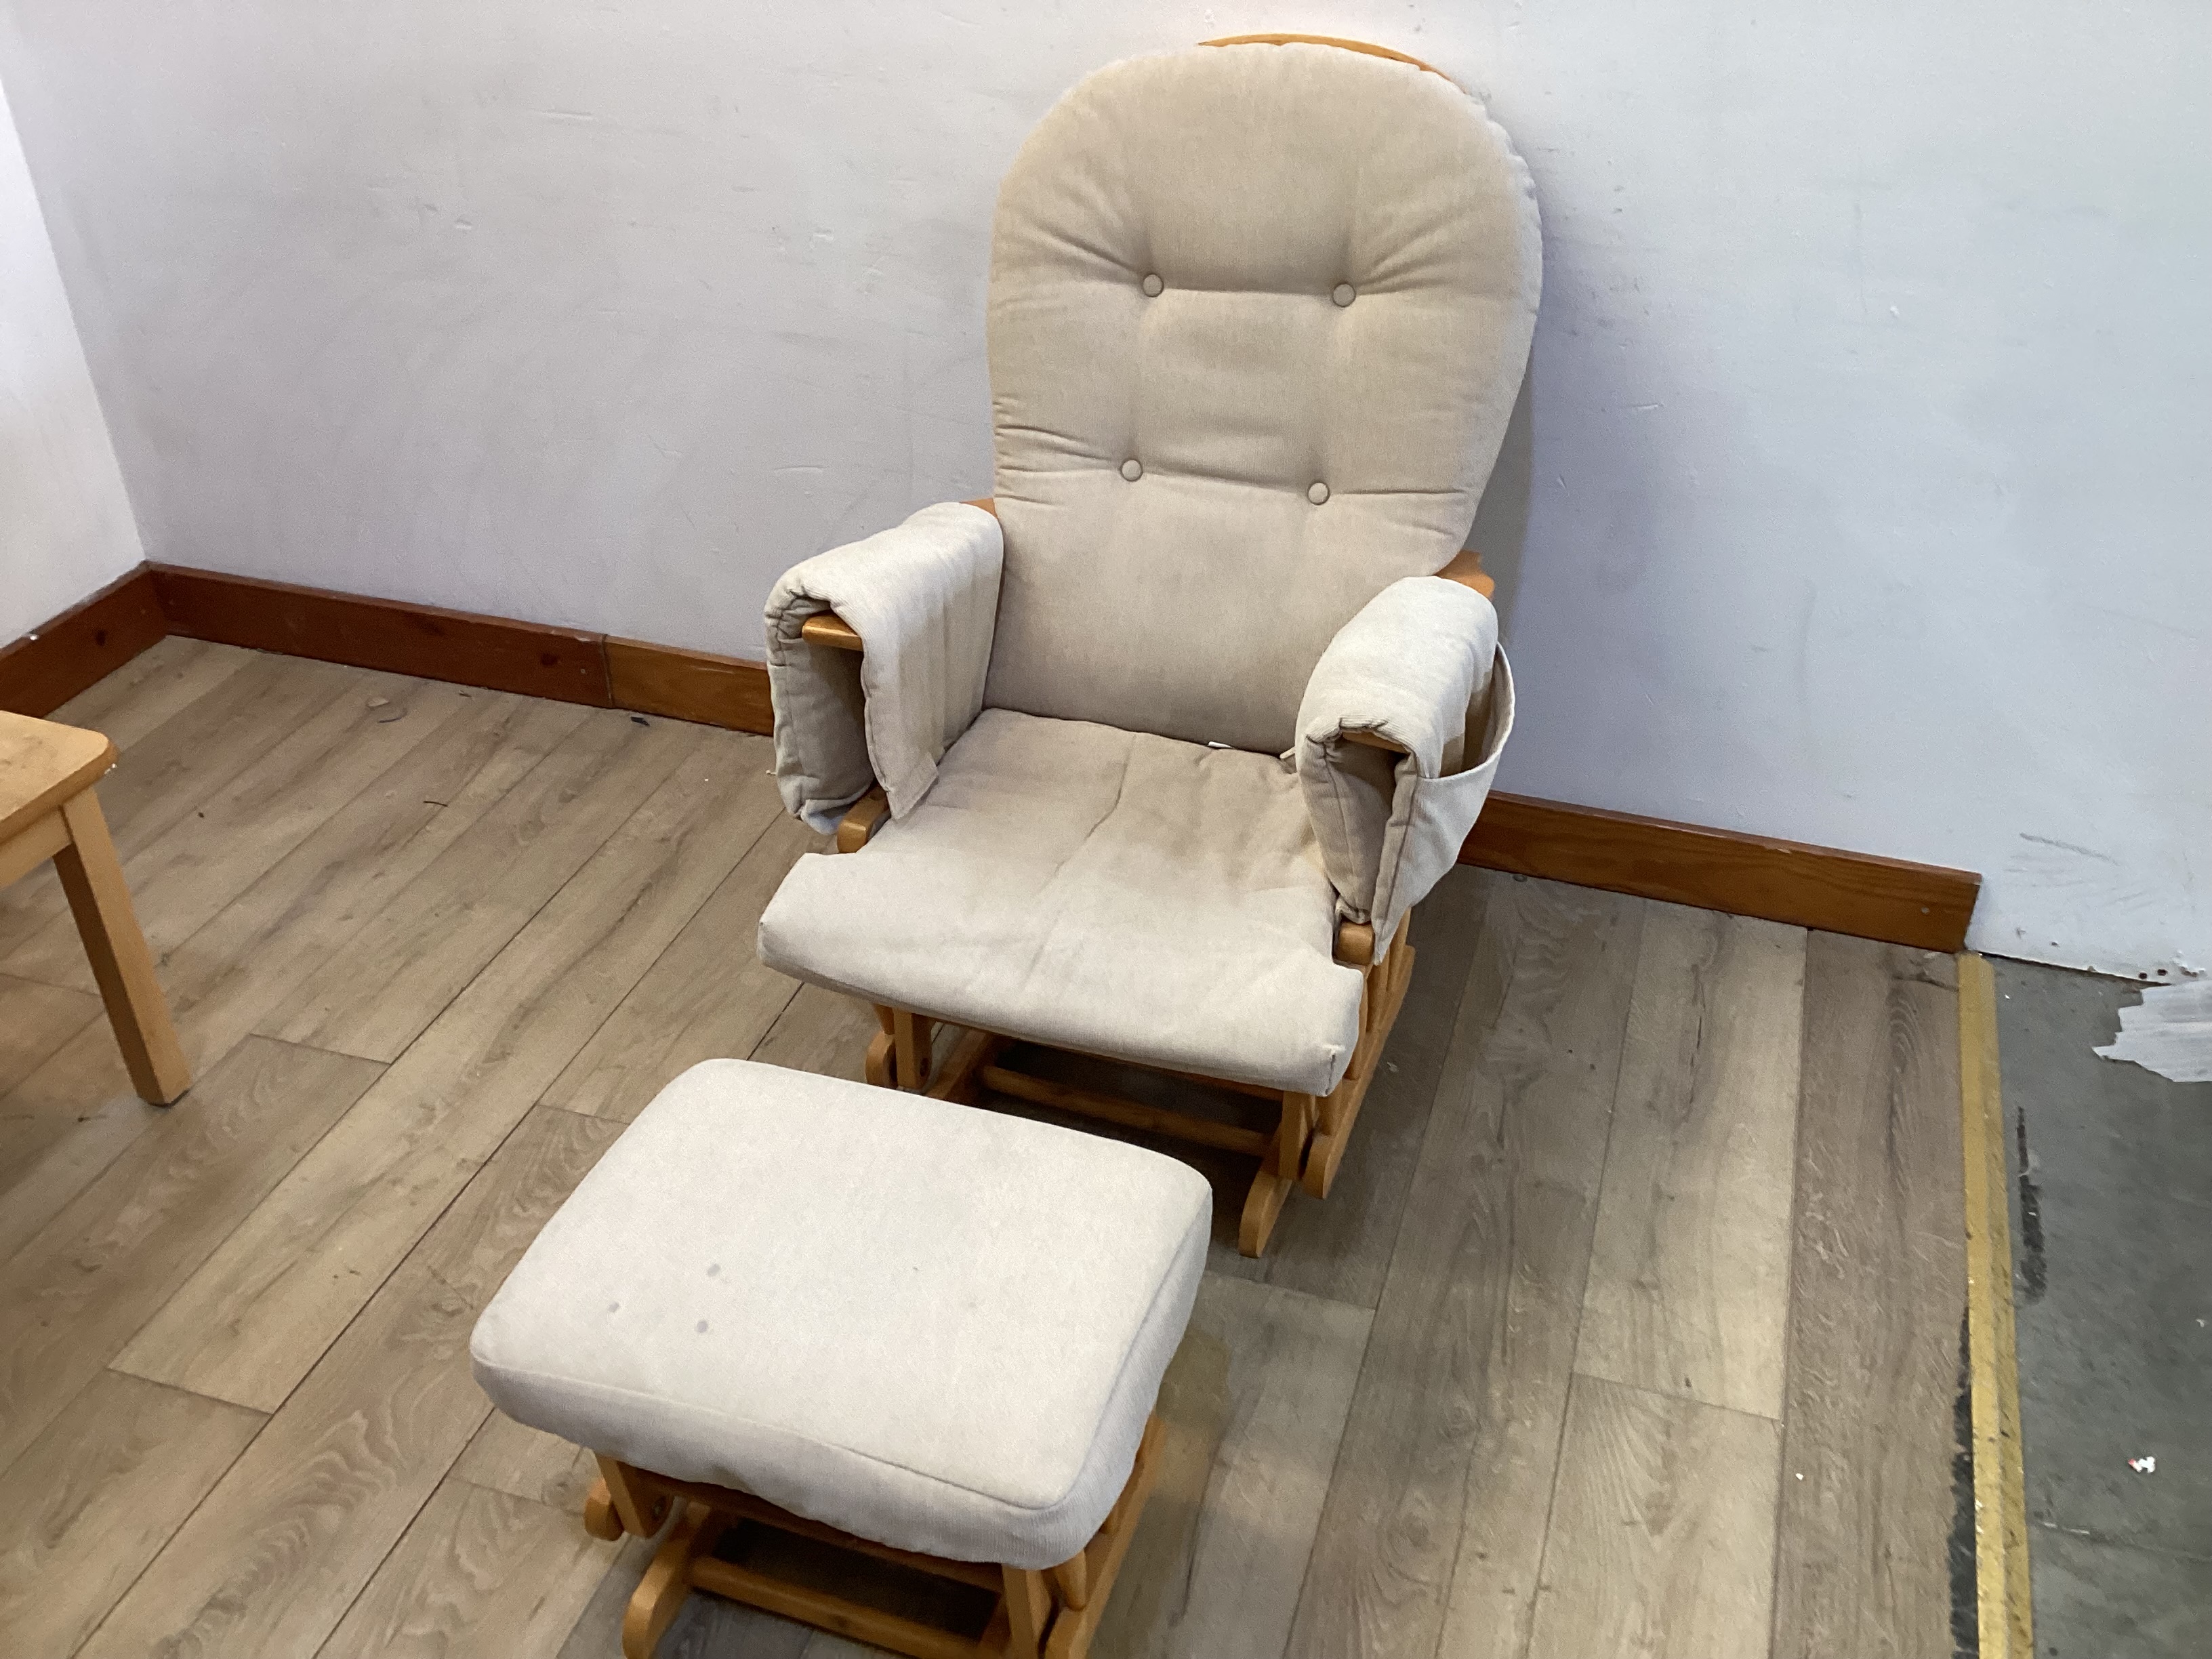 Nursing Chair with Foot Stool